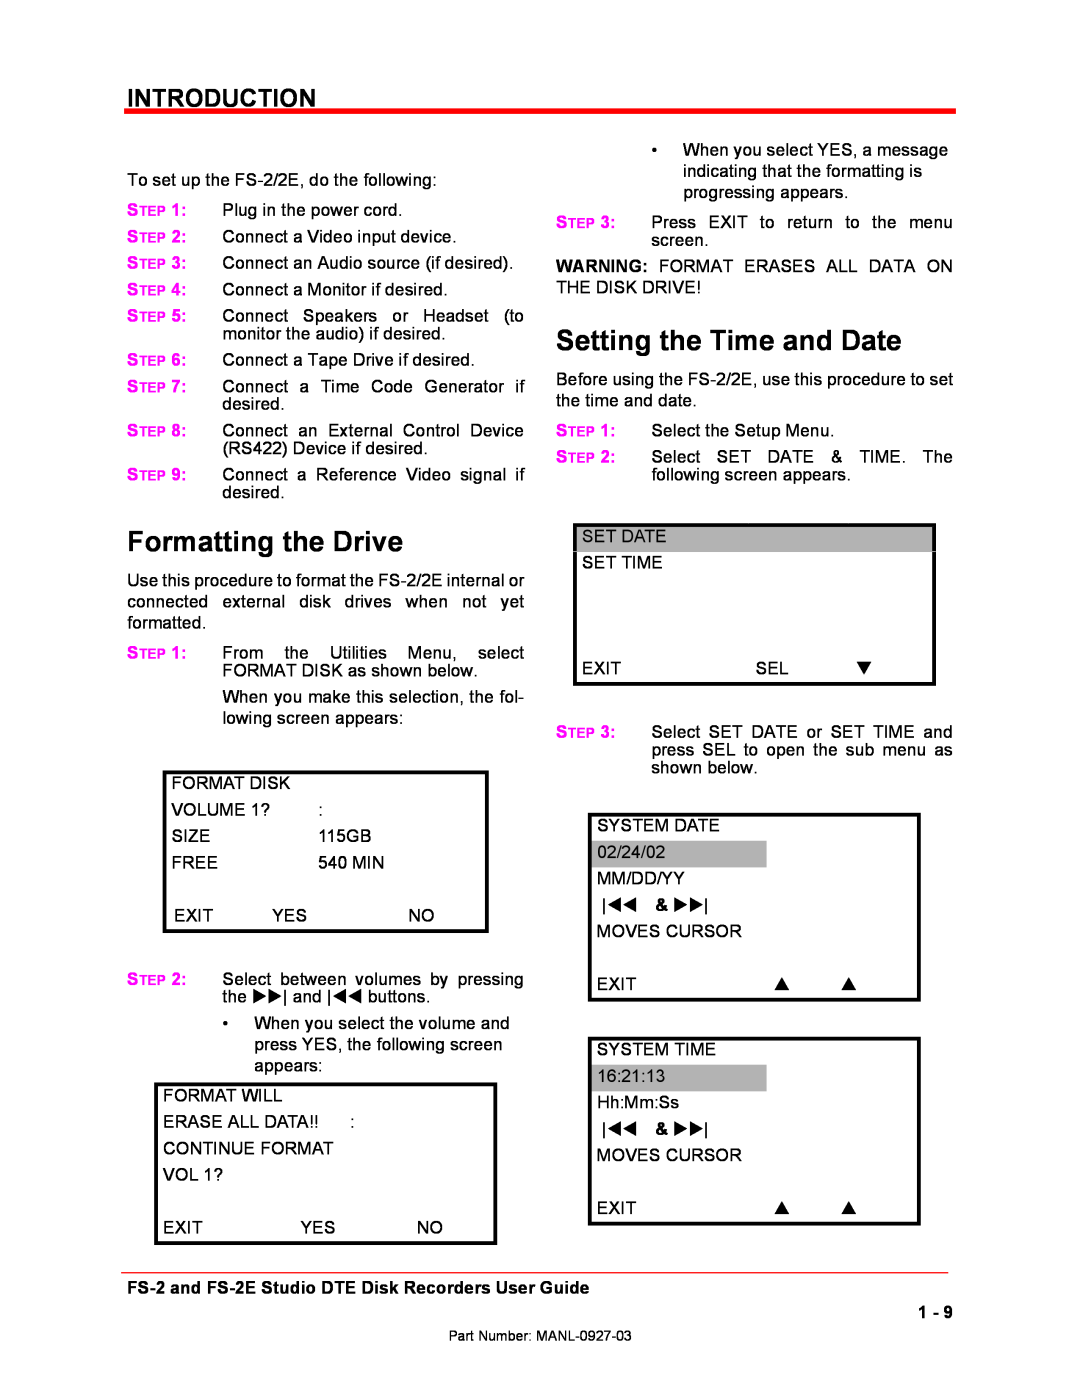 FOCUS Enhancements FS-2/2E manual Formatting the Drive, Setting the Time and Date, Introduction 